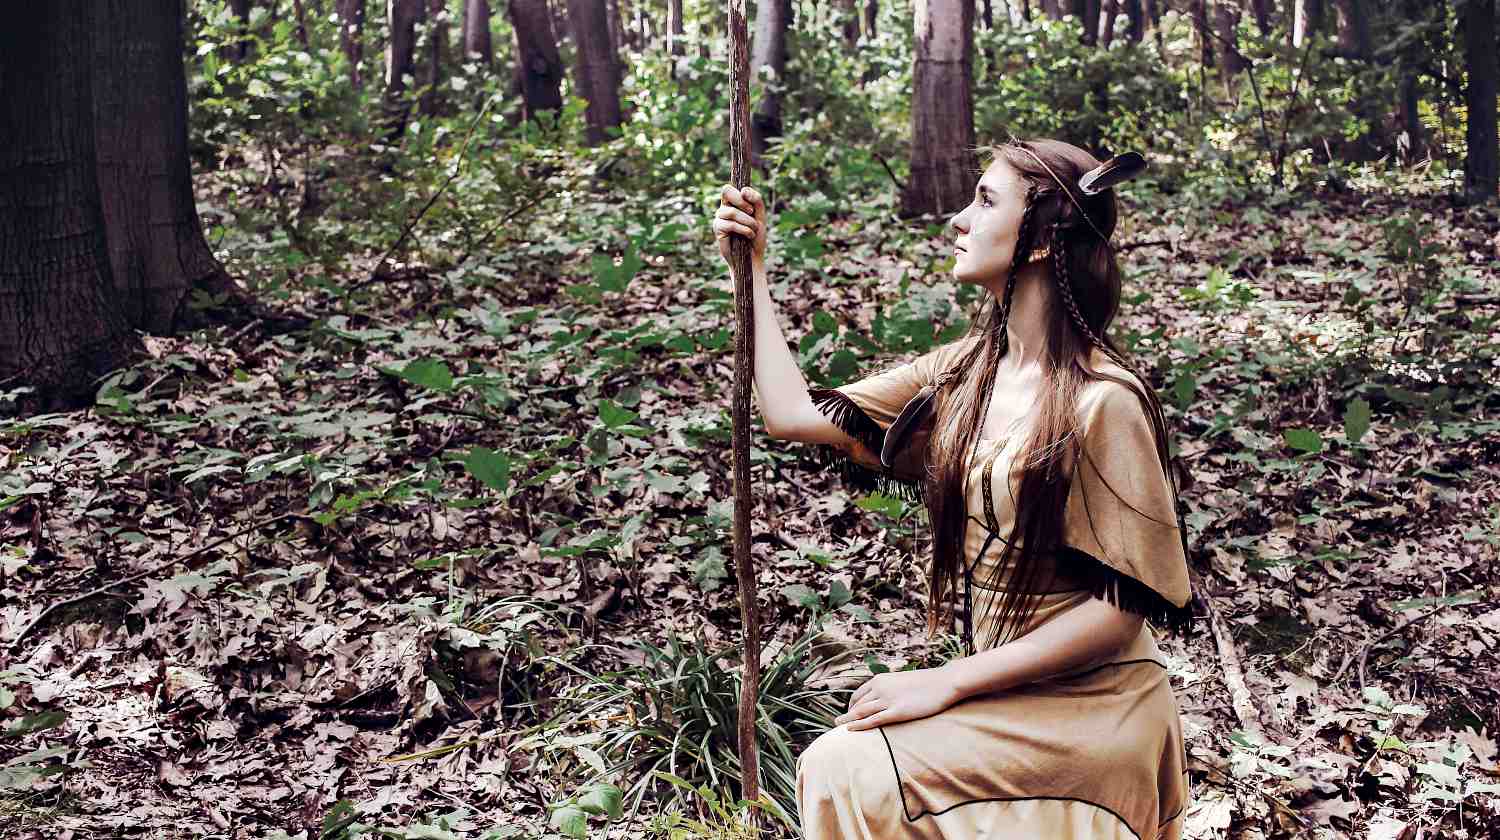 beautiful native American | DIY Pocahontas Costume Ideas You Can Try | Featured